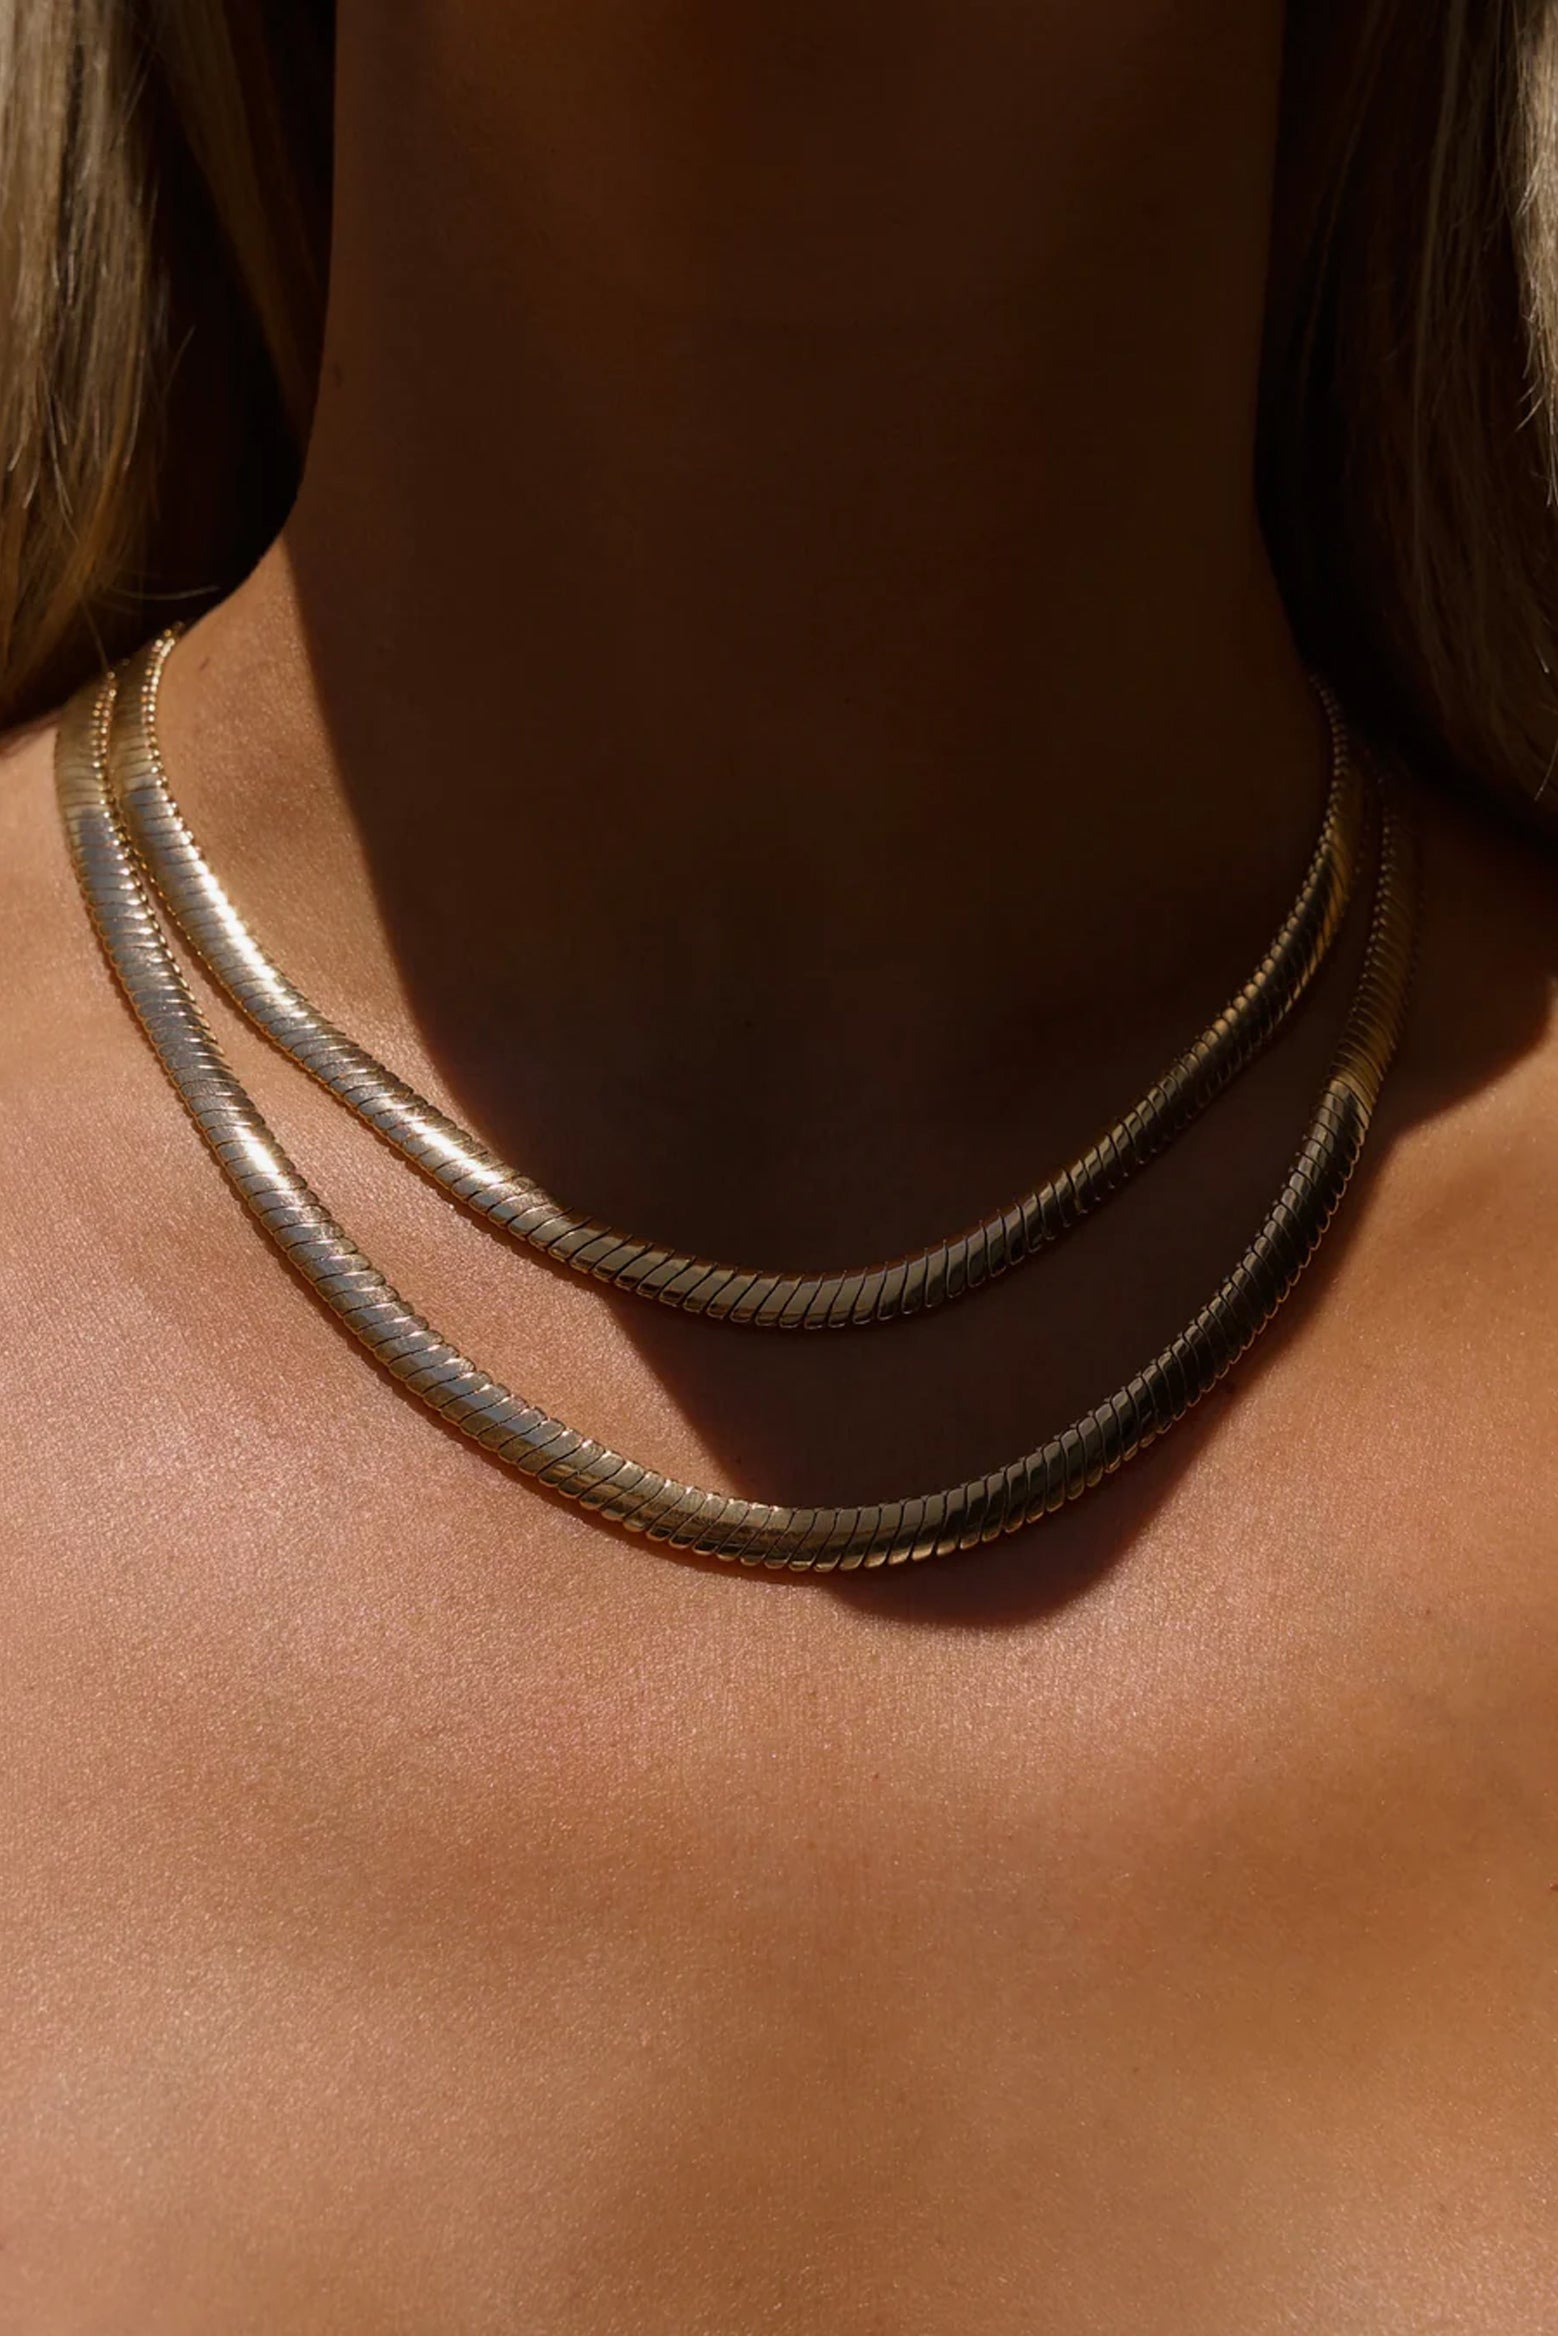 Eclatant Empress Chain in Gold available at The New Trend Australia.